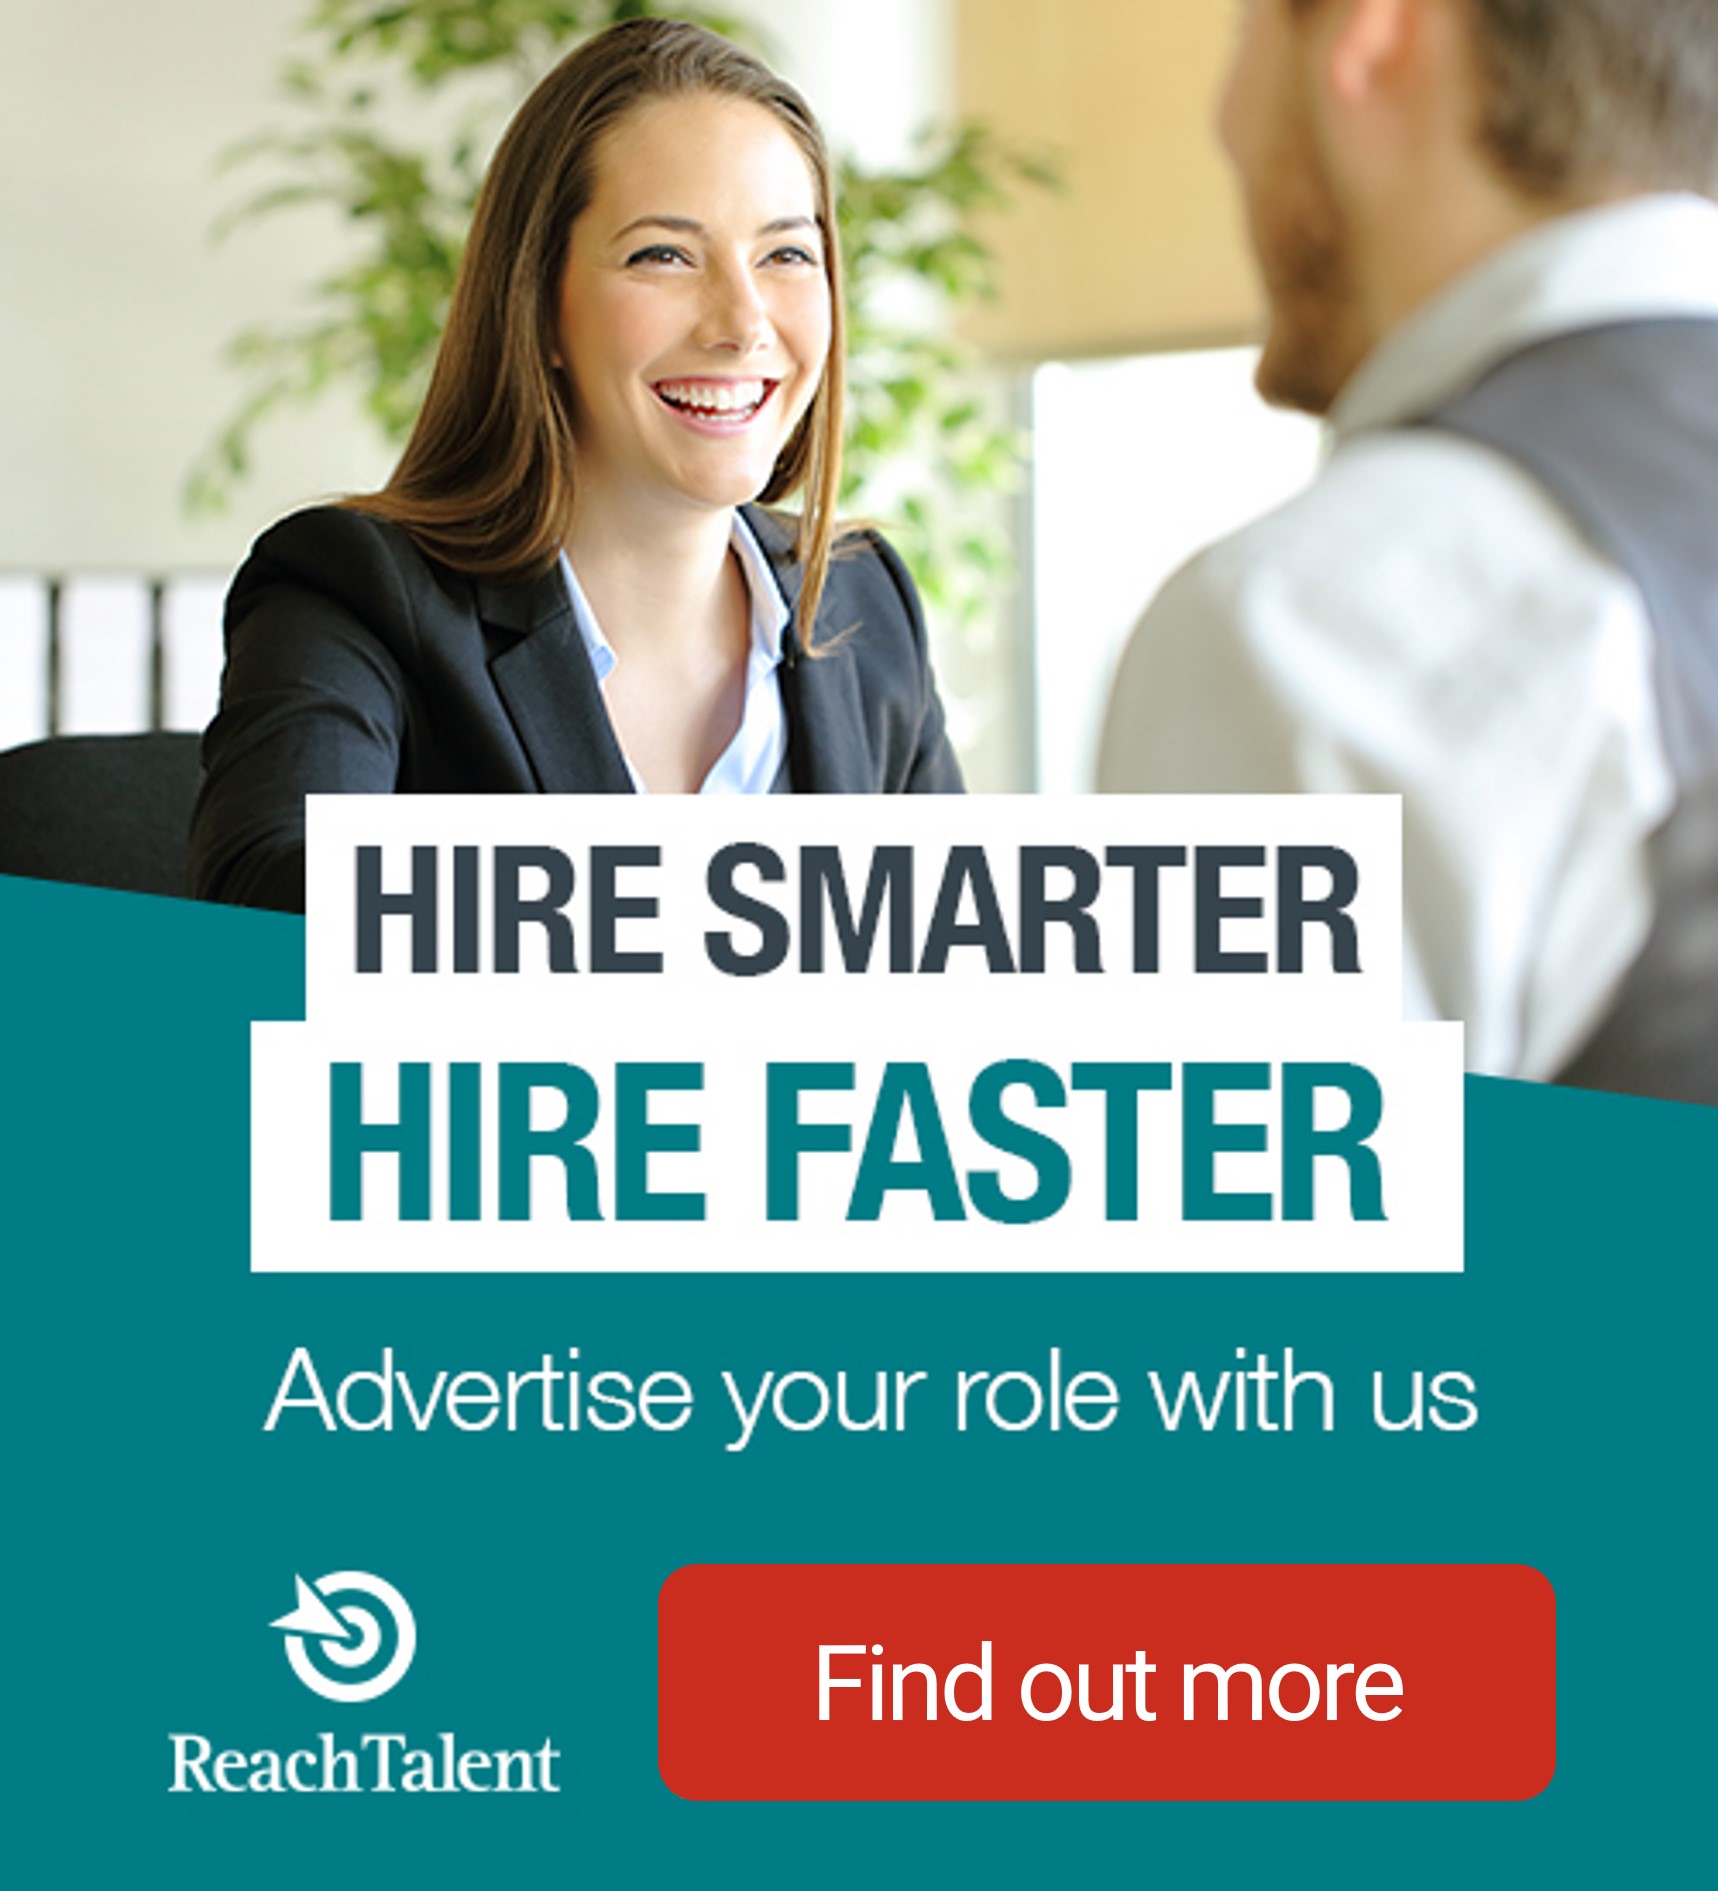 Advertise Your Role With ReachTalent